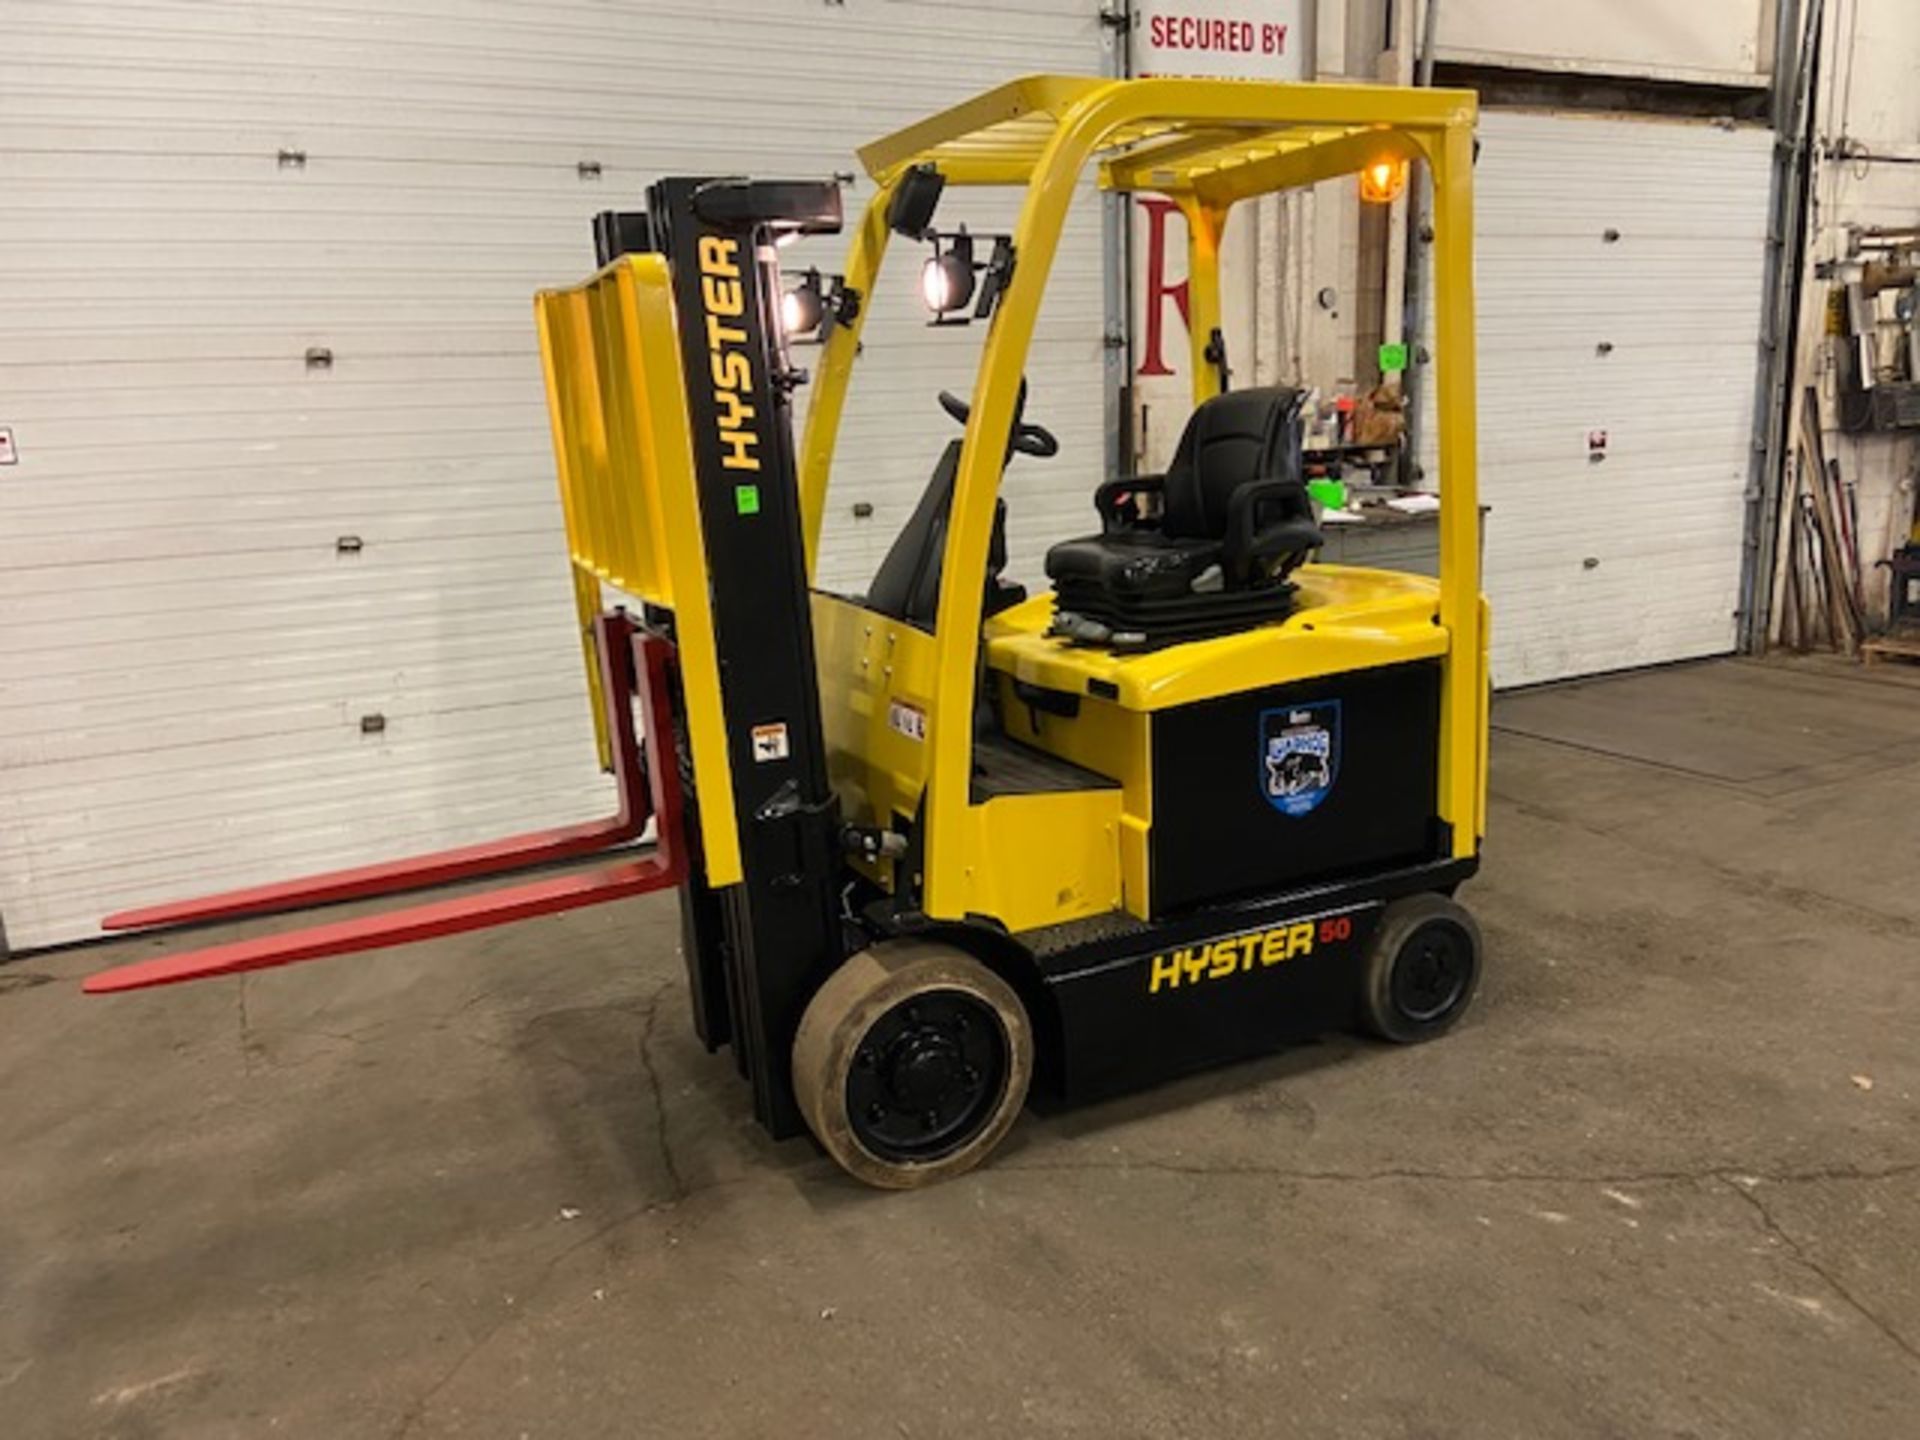 FREE CUSTOMS - 2011 Hyster 5000lbs Capacity Forklift Electric with 3-STAGE MAST sideshift MINT